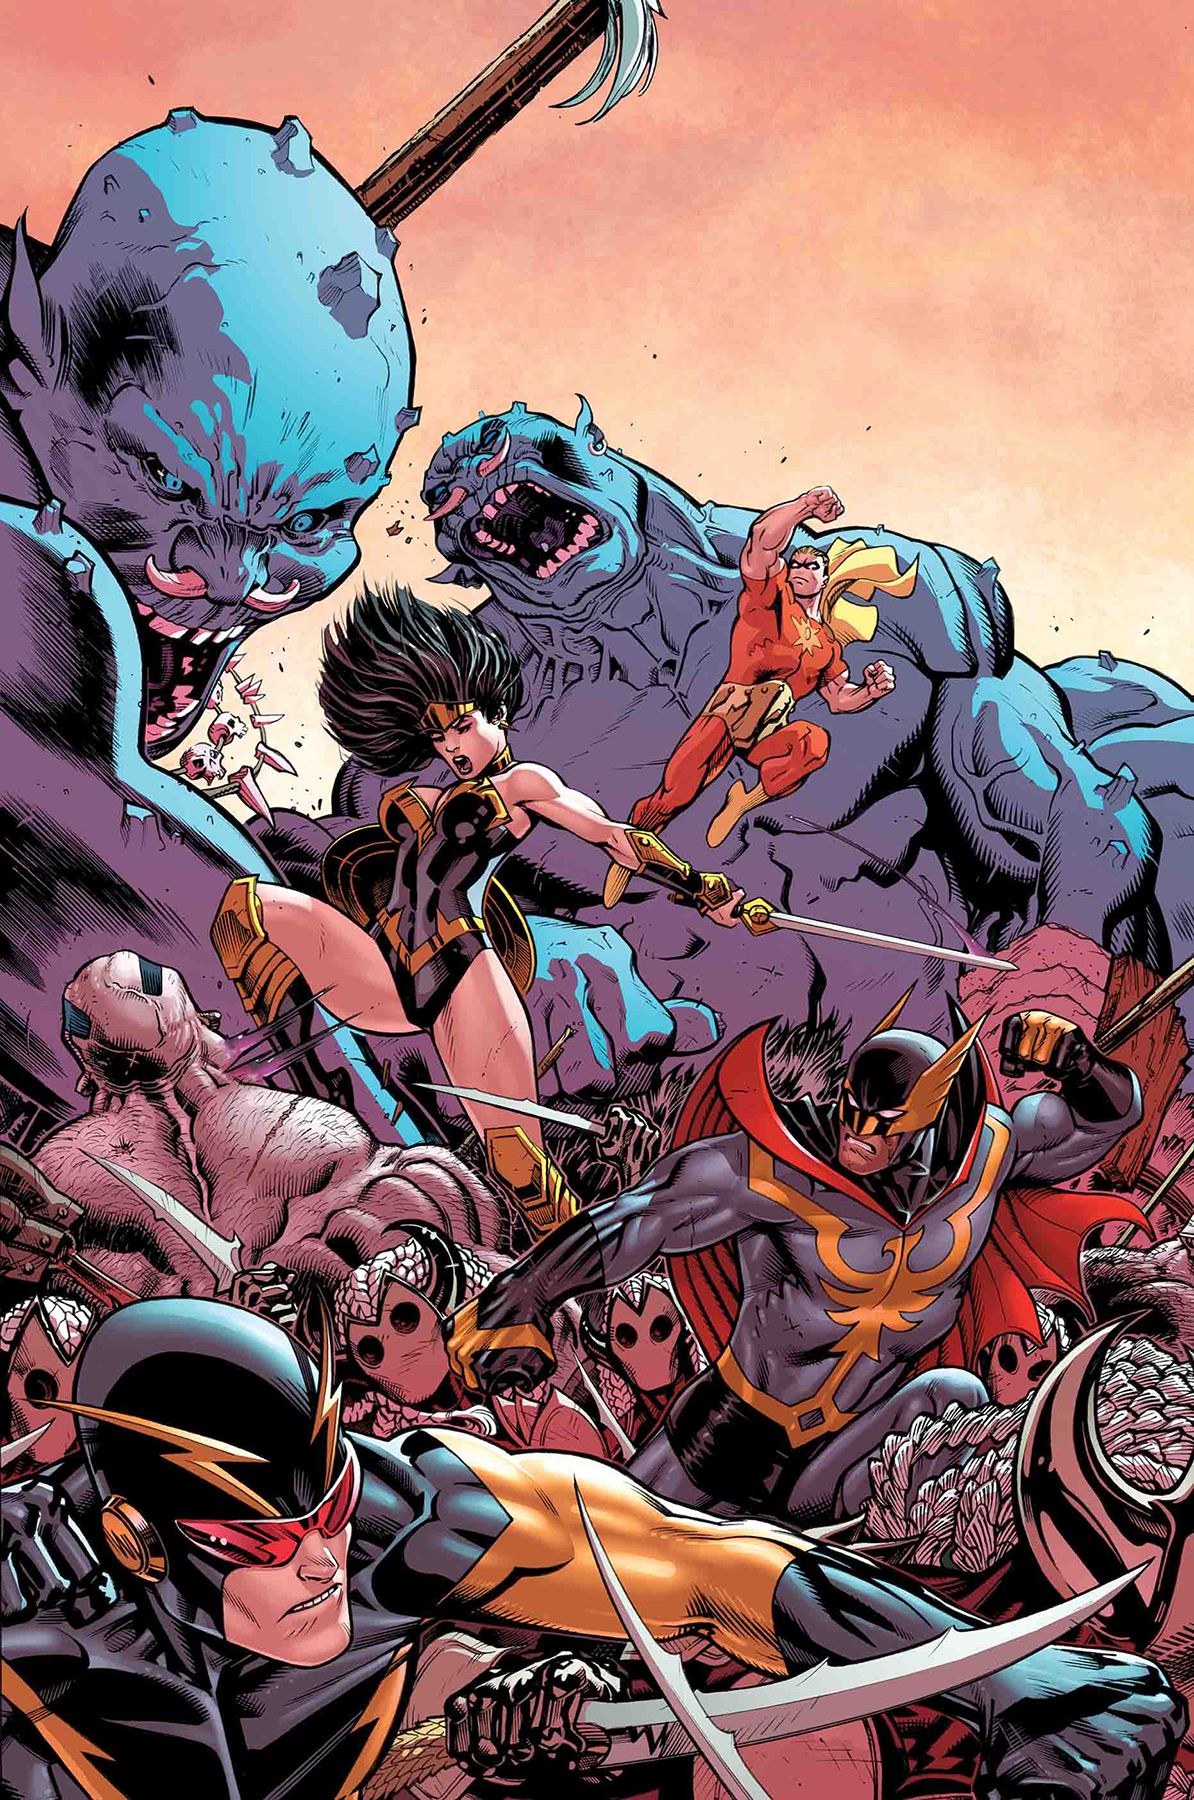 Avengers Join The Battle in "War of the Realms" Tie-In